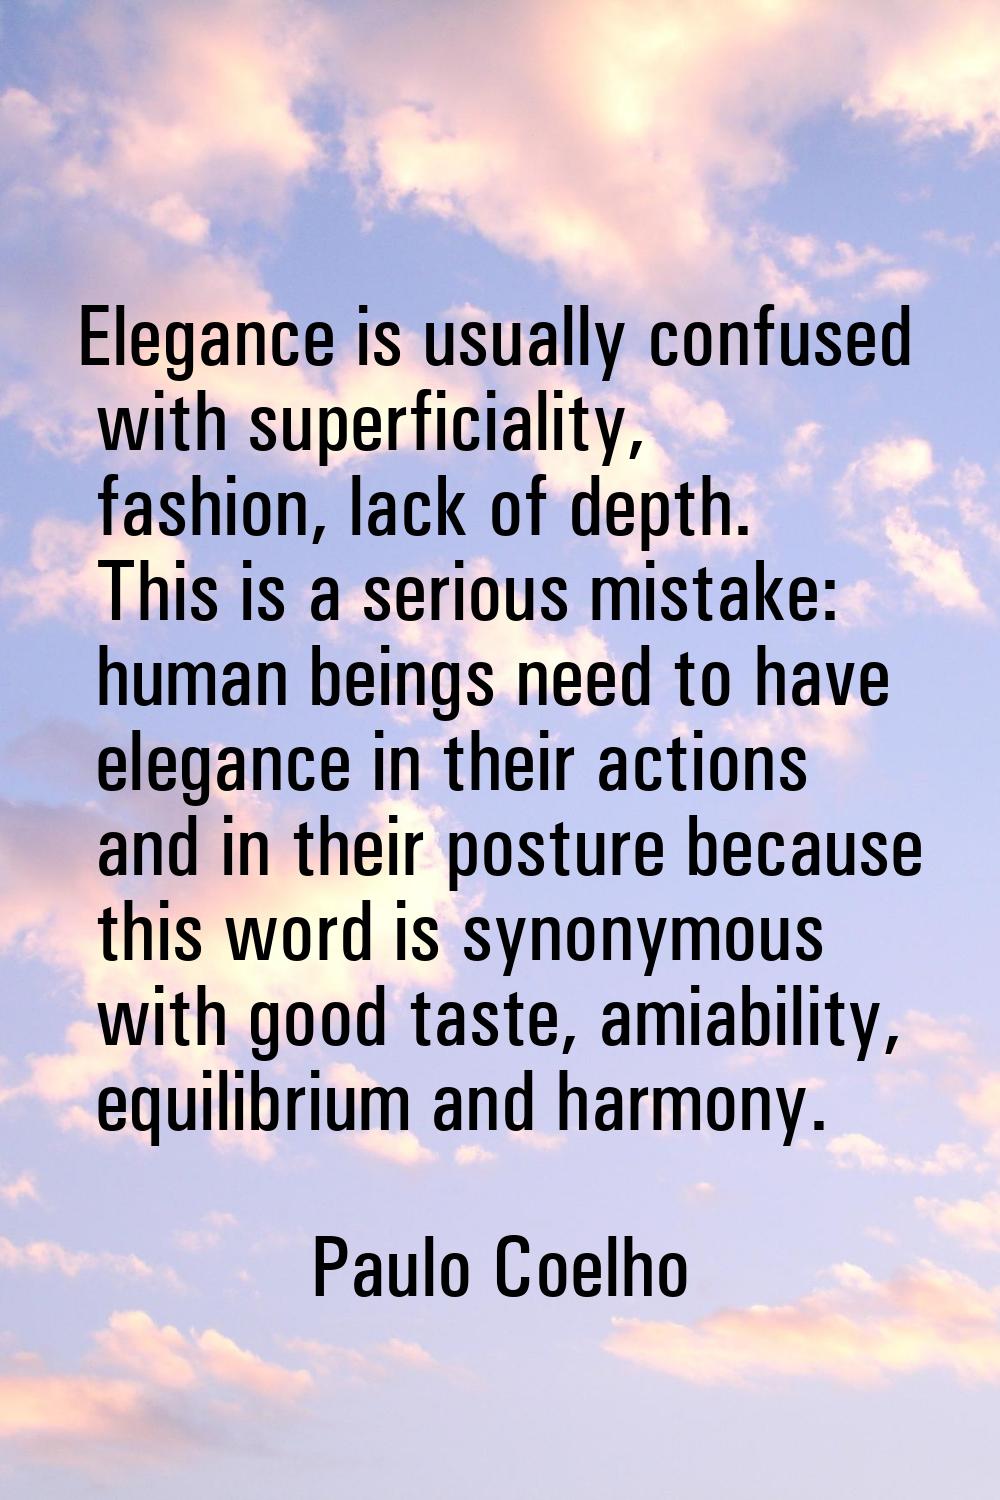 Elegance is usually confused with superficiality, fashion, lack of depth. This is a serious mistake